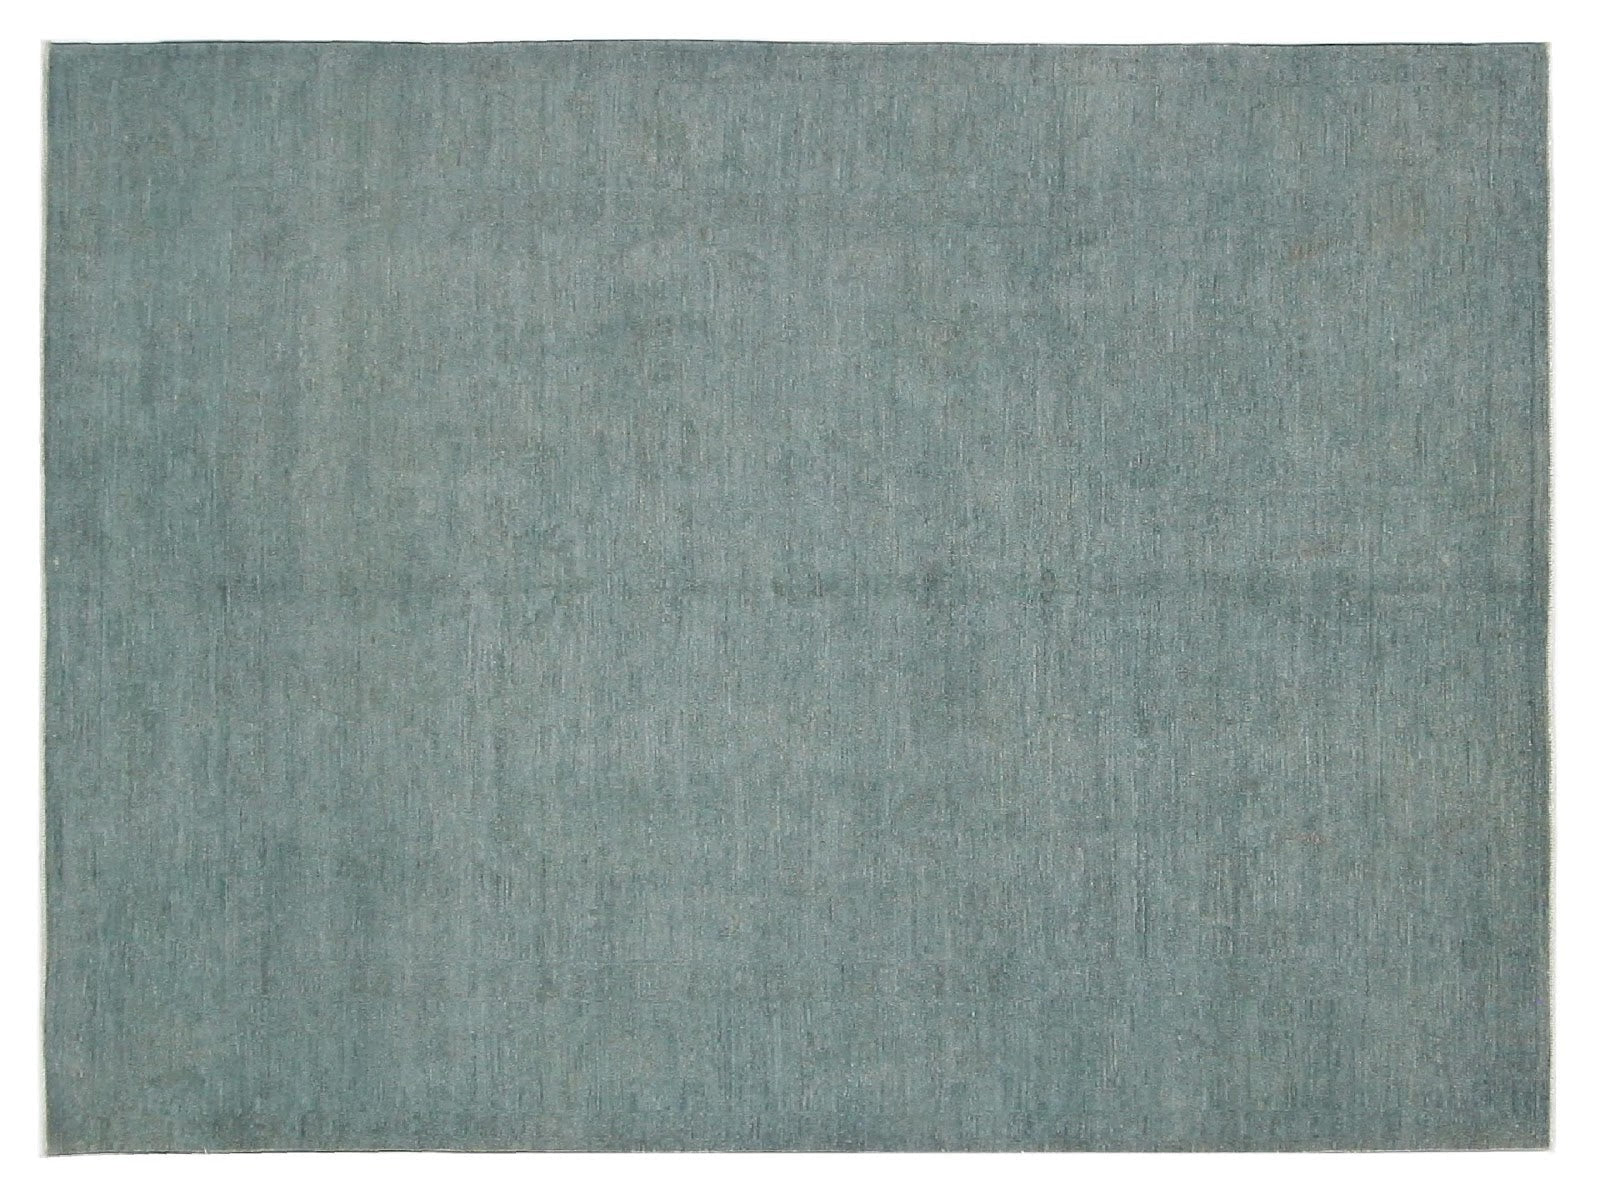 8x10 overdyed transitional rug in light blue/aqua with minimal design, perfect for modern or traditional homes